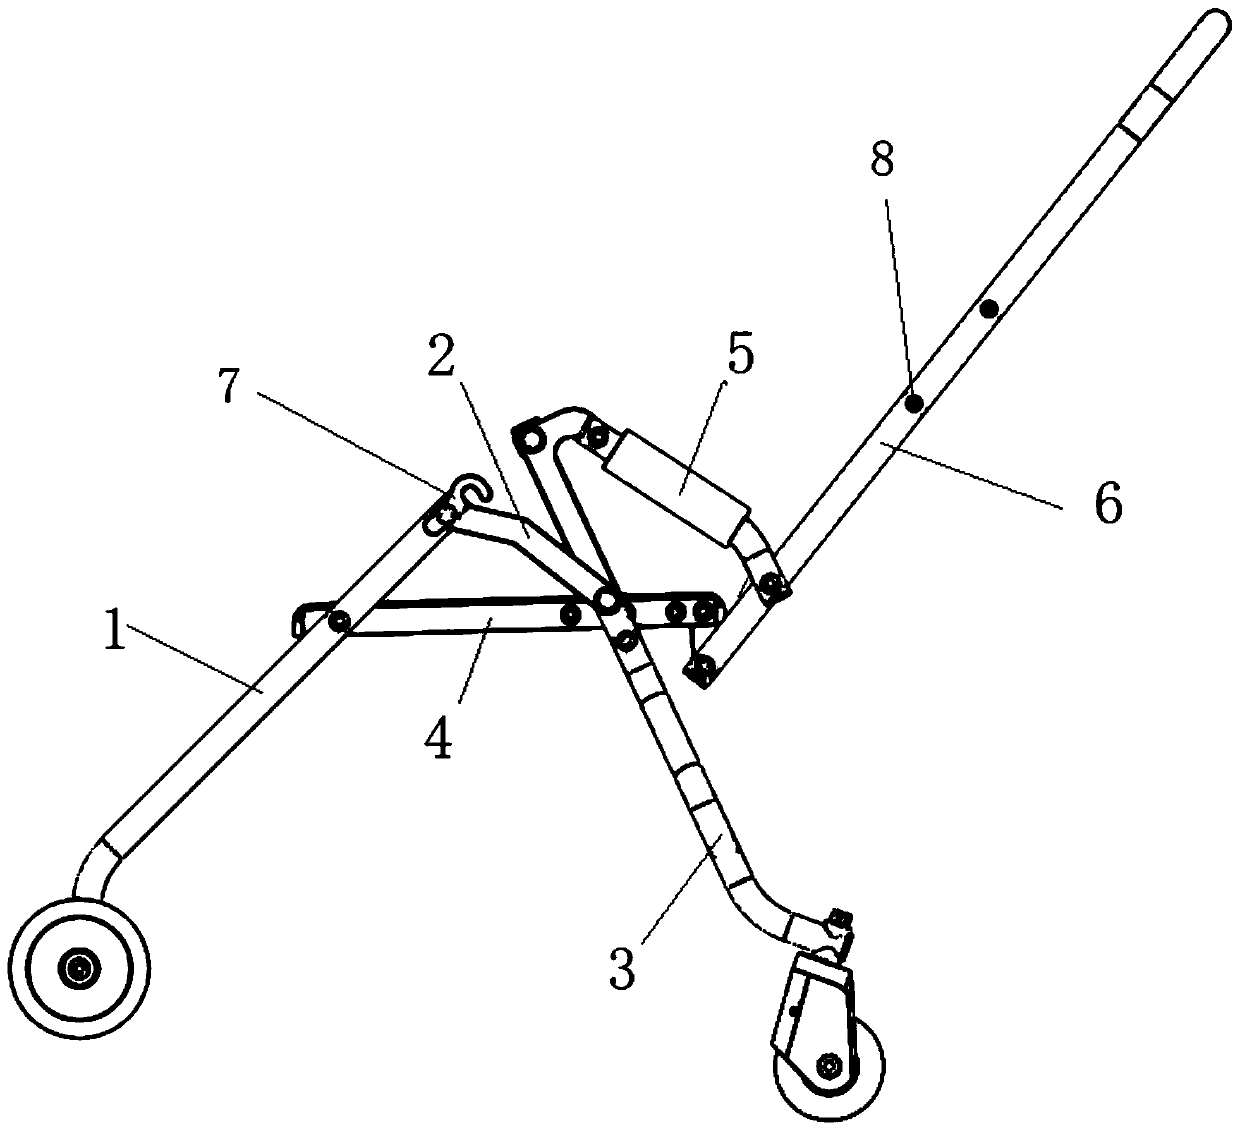 Foldable frame structure applied to portable baby carriage